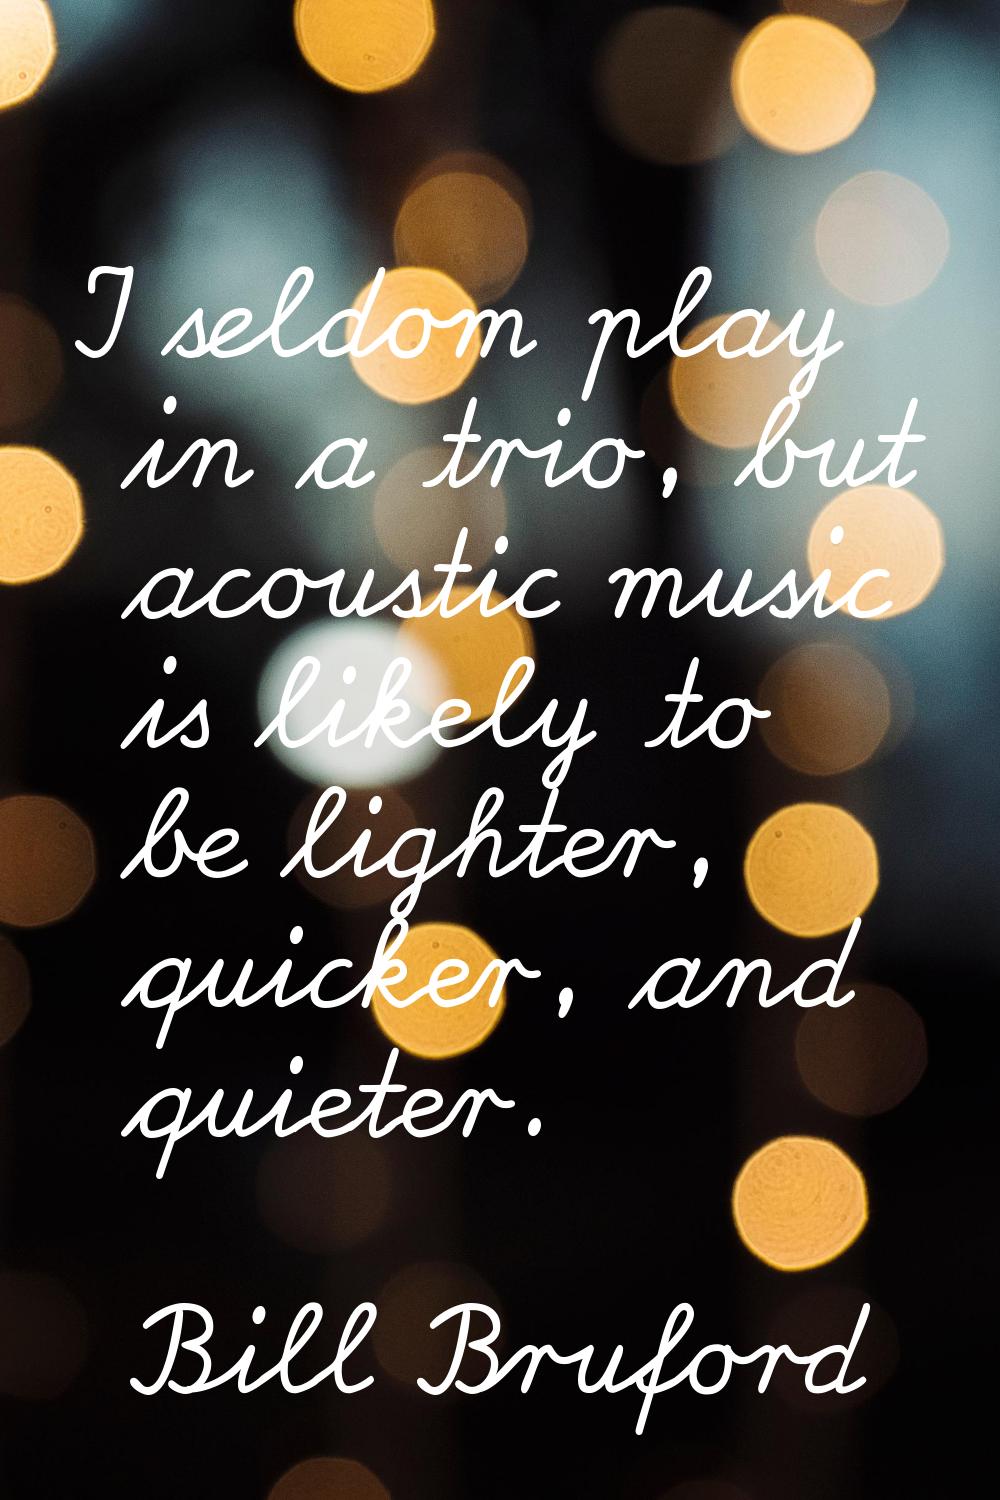 I seldom play in a trio, but acoustic music is likely to be lighter, quicker, and quieter.